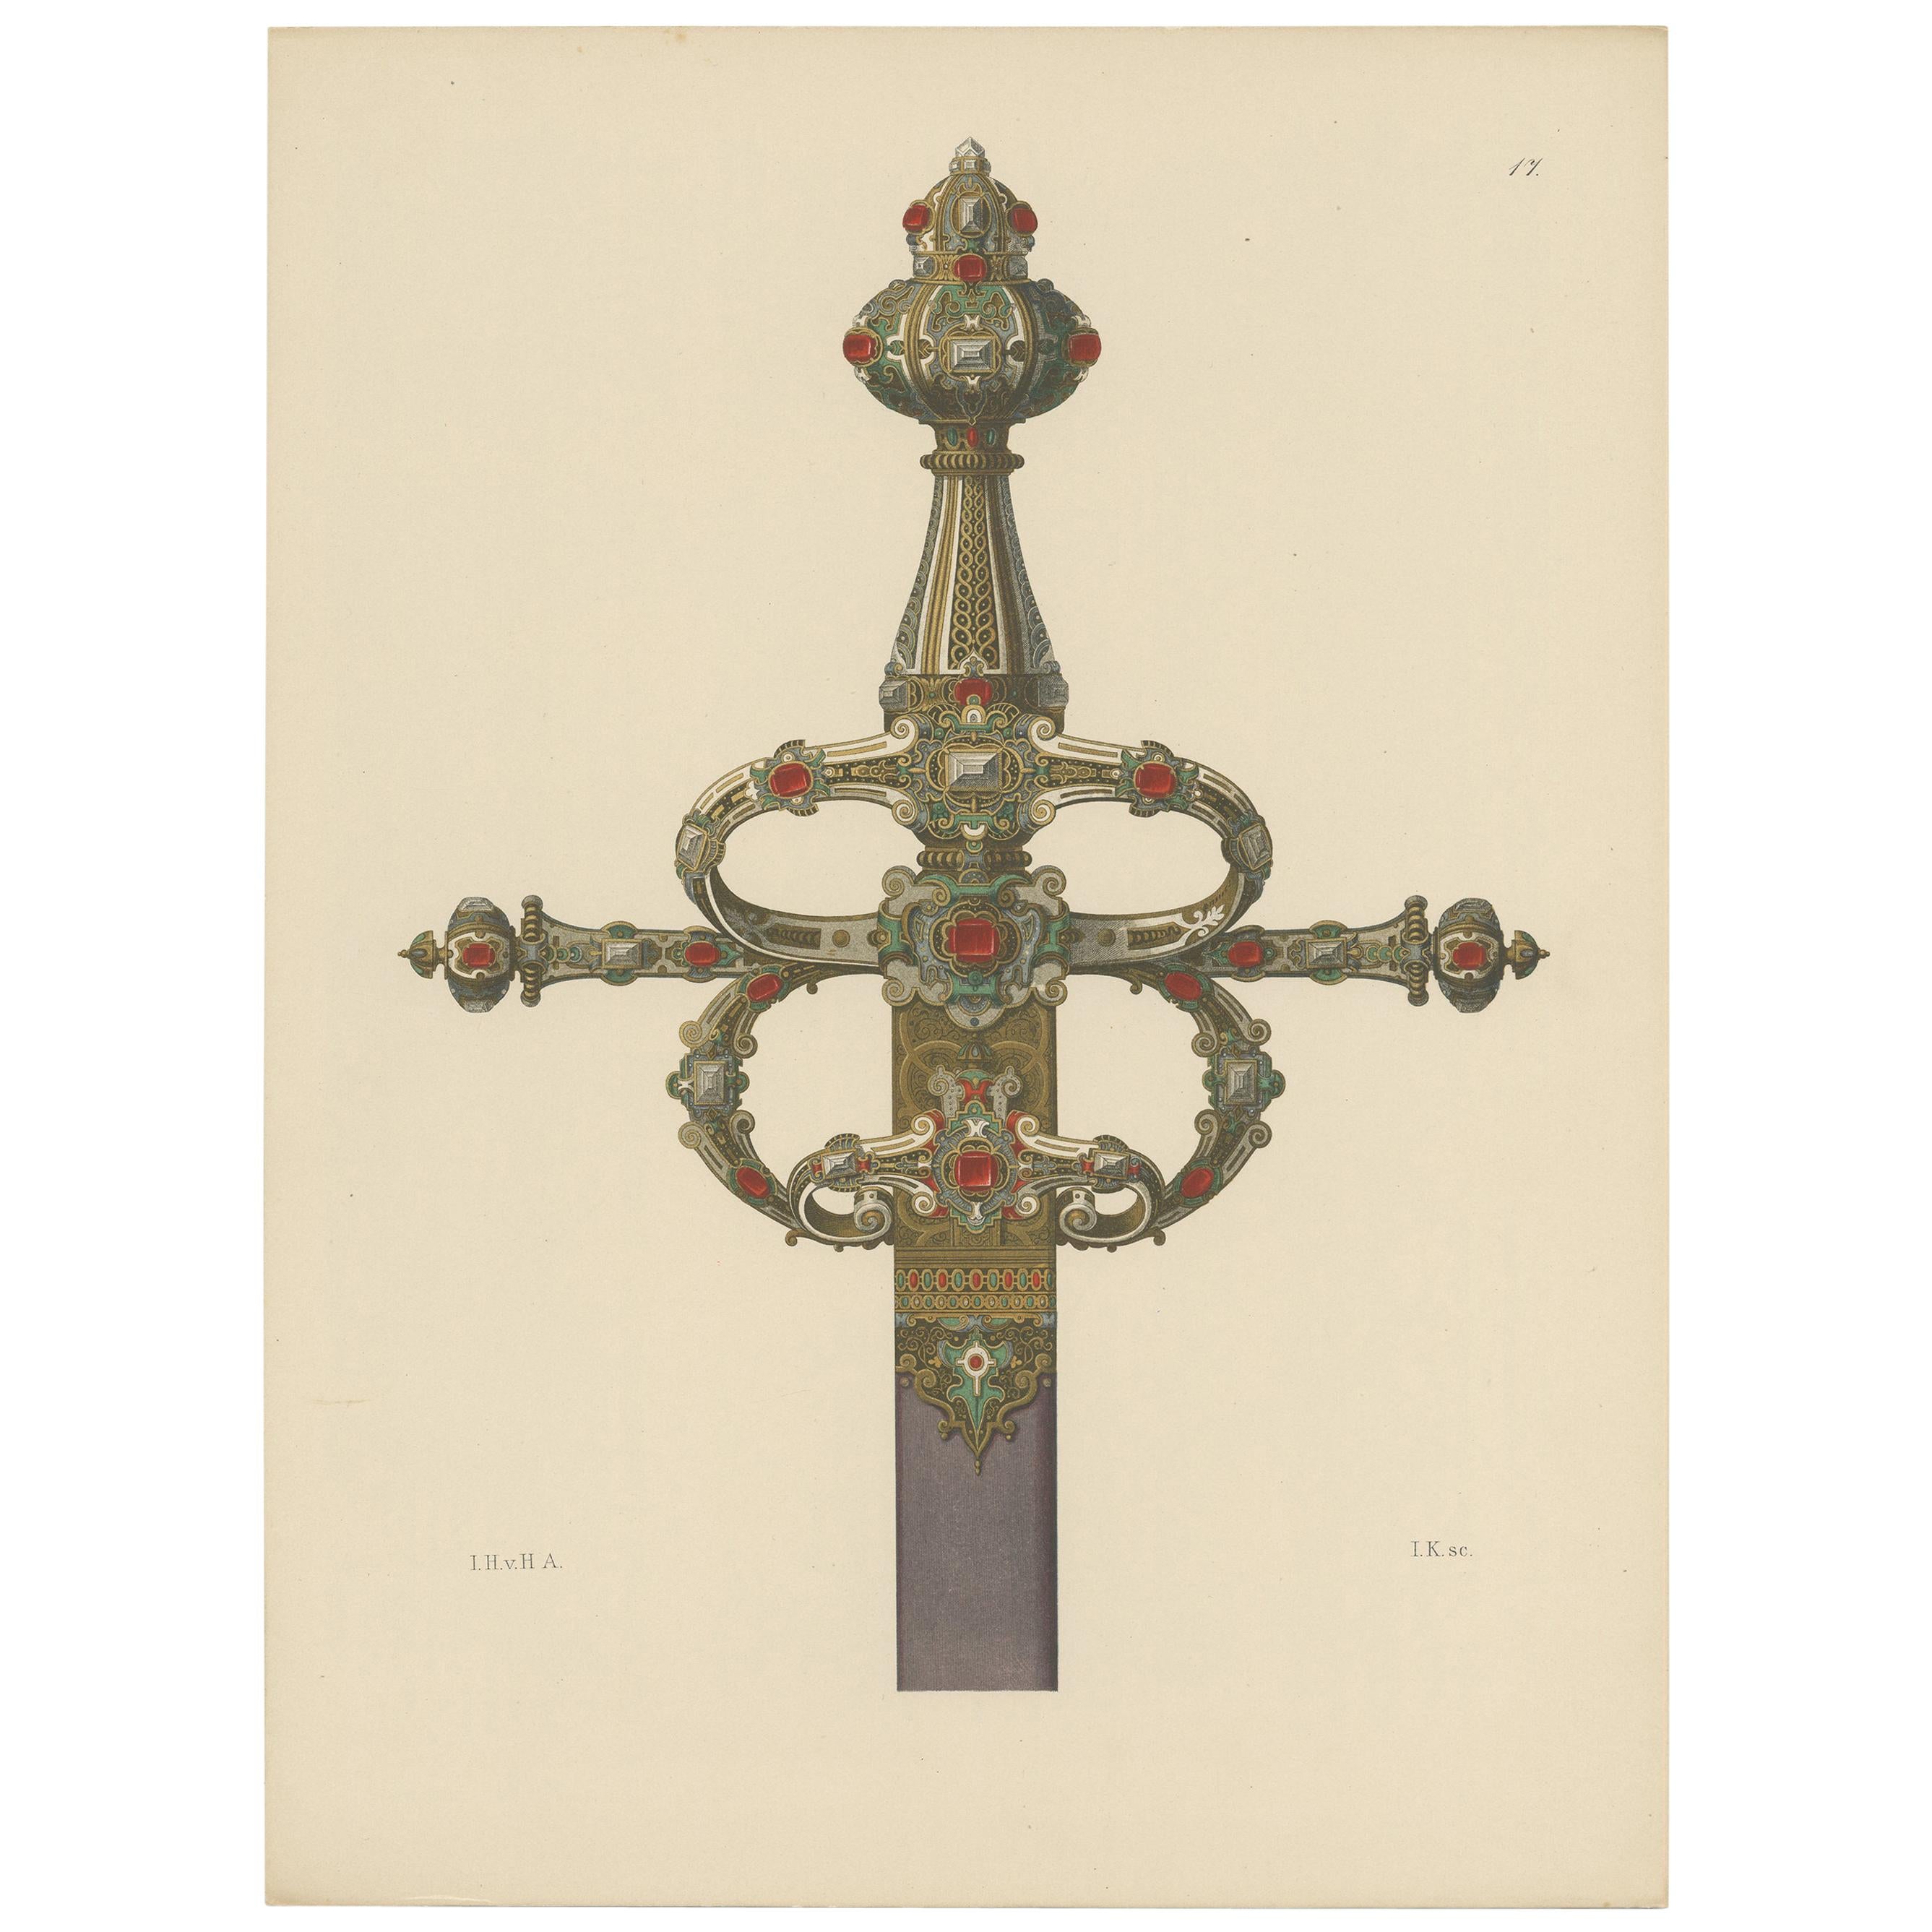 Antique Print of a Sword Decorated with Gold and Gems by Hefner-Alteneck, 1890